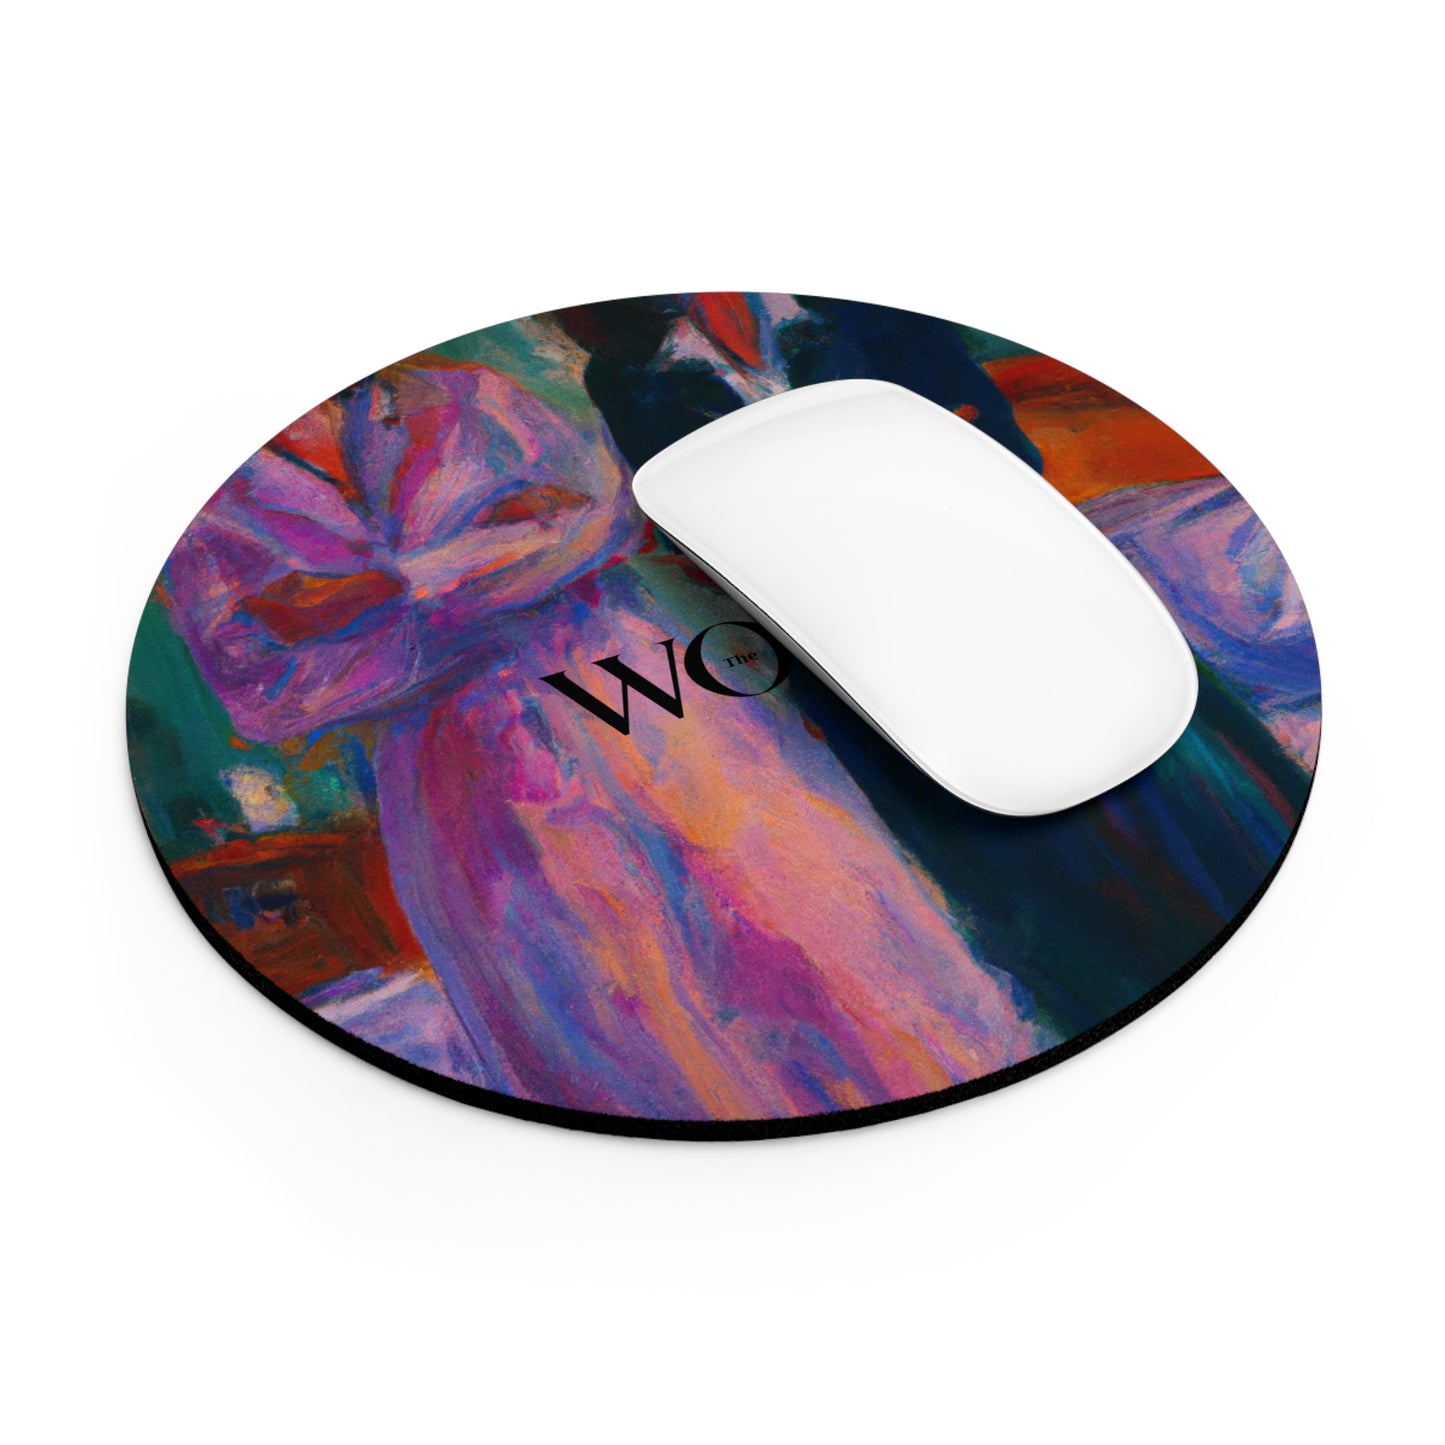 AND? - Mouse Pad